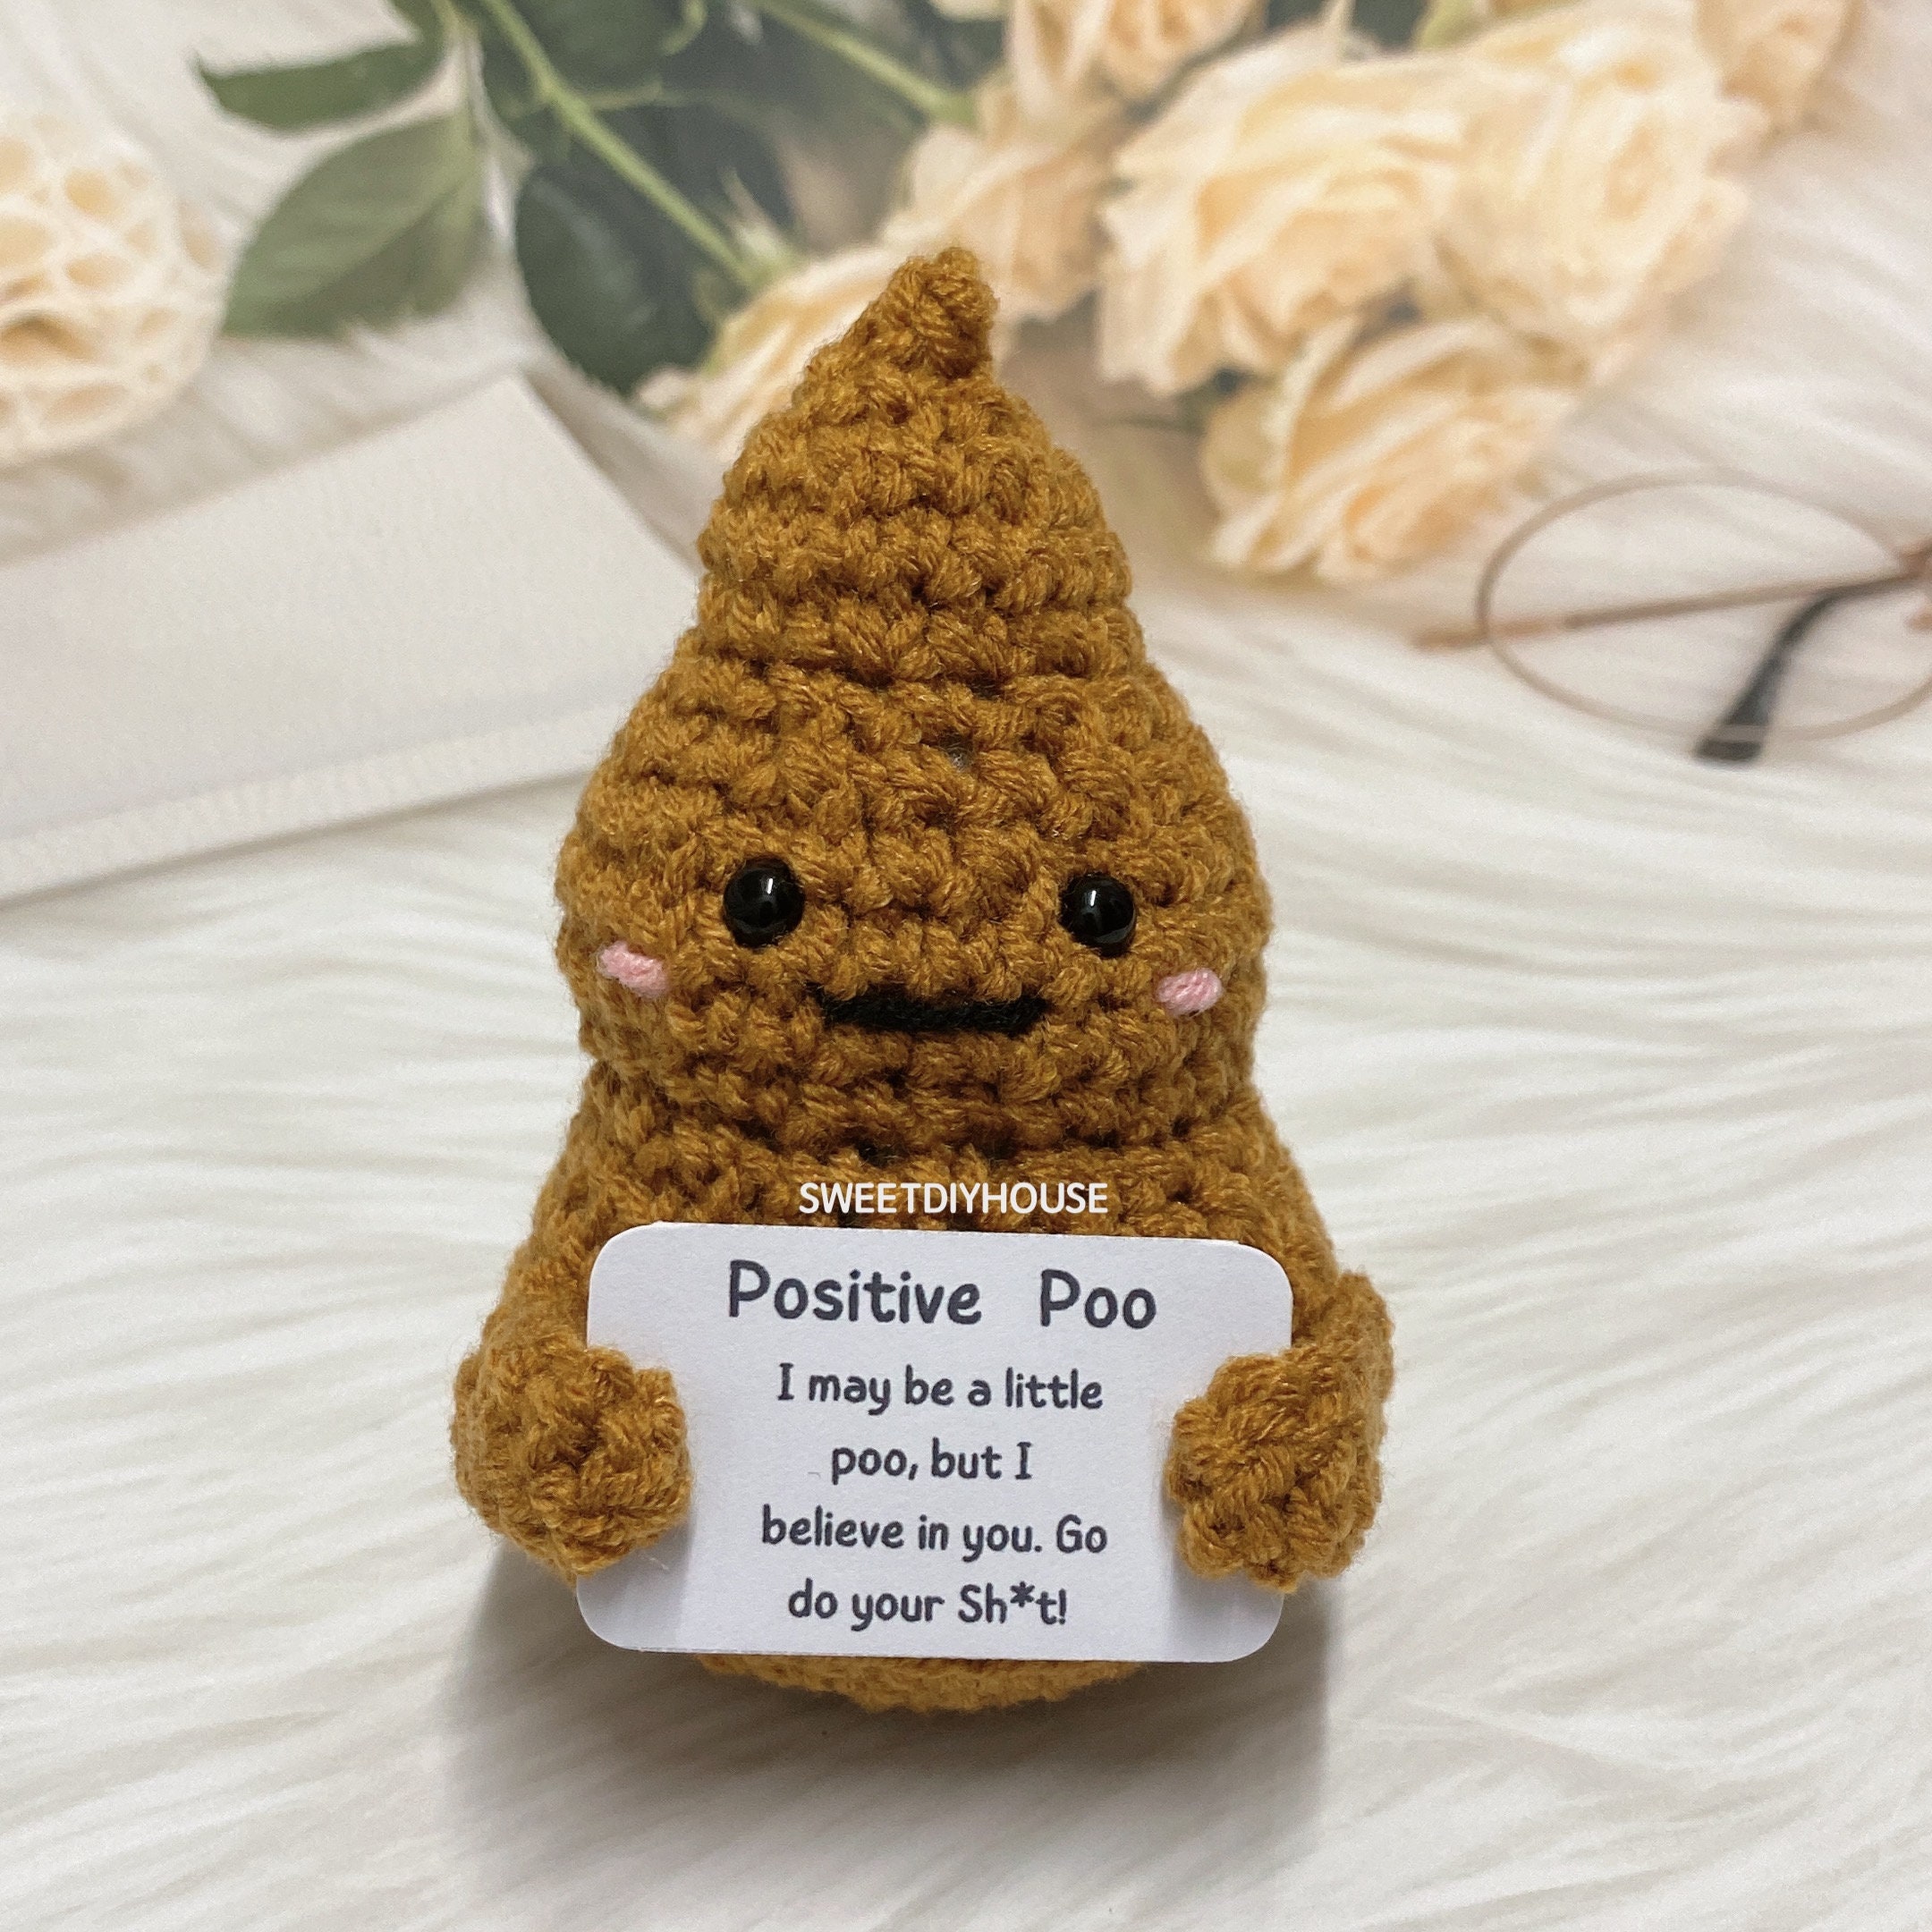 Crochet Positive Poo, Cute Poo Decor, Crochet Emotional Support Poo,  Amigurimi Poo With Positive Quote, Handmade Plush Poo, Best Friend Gift 